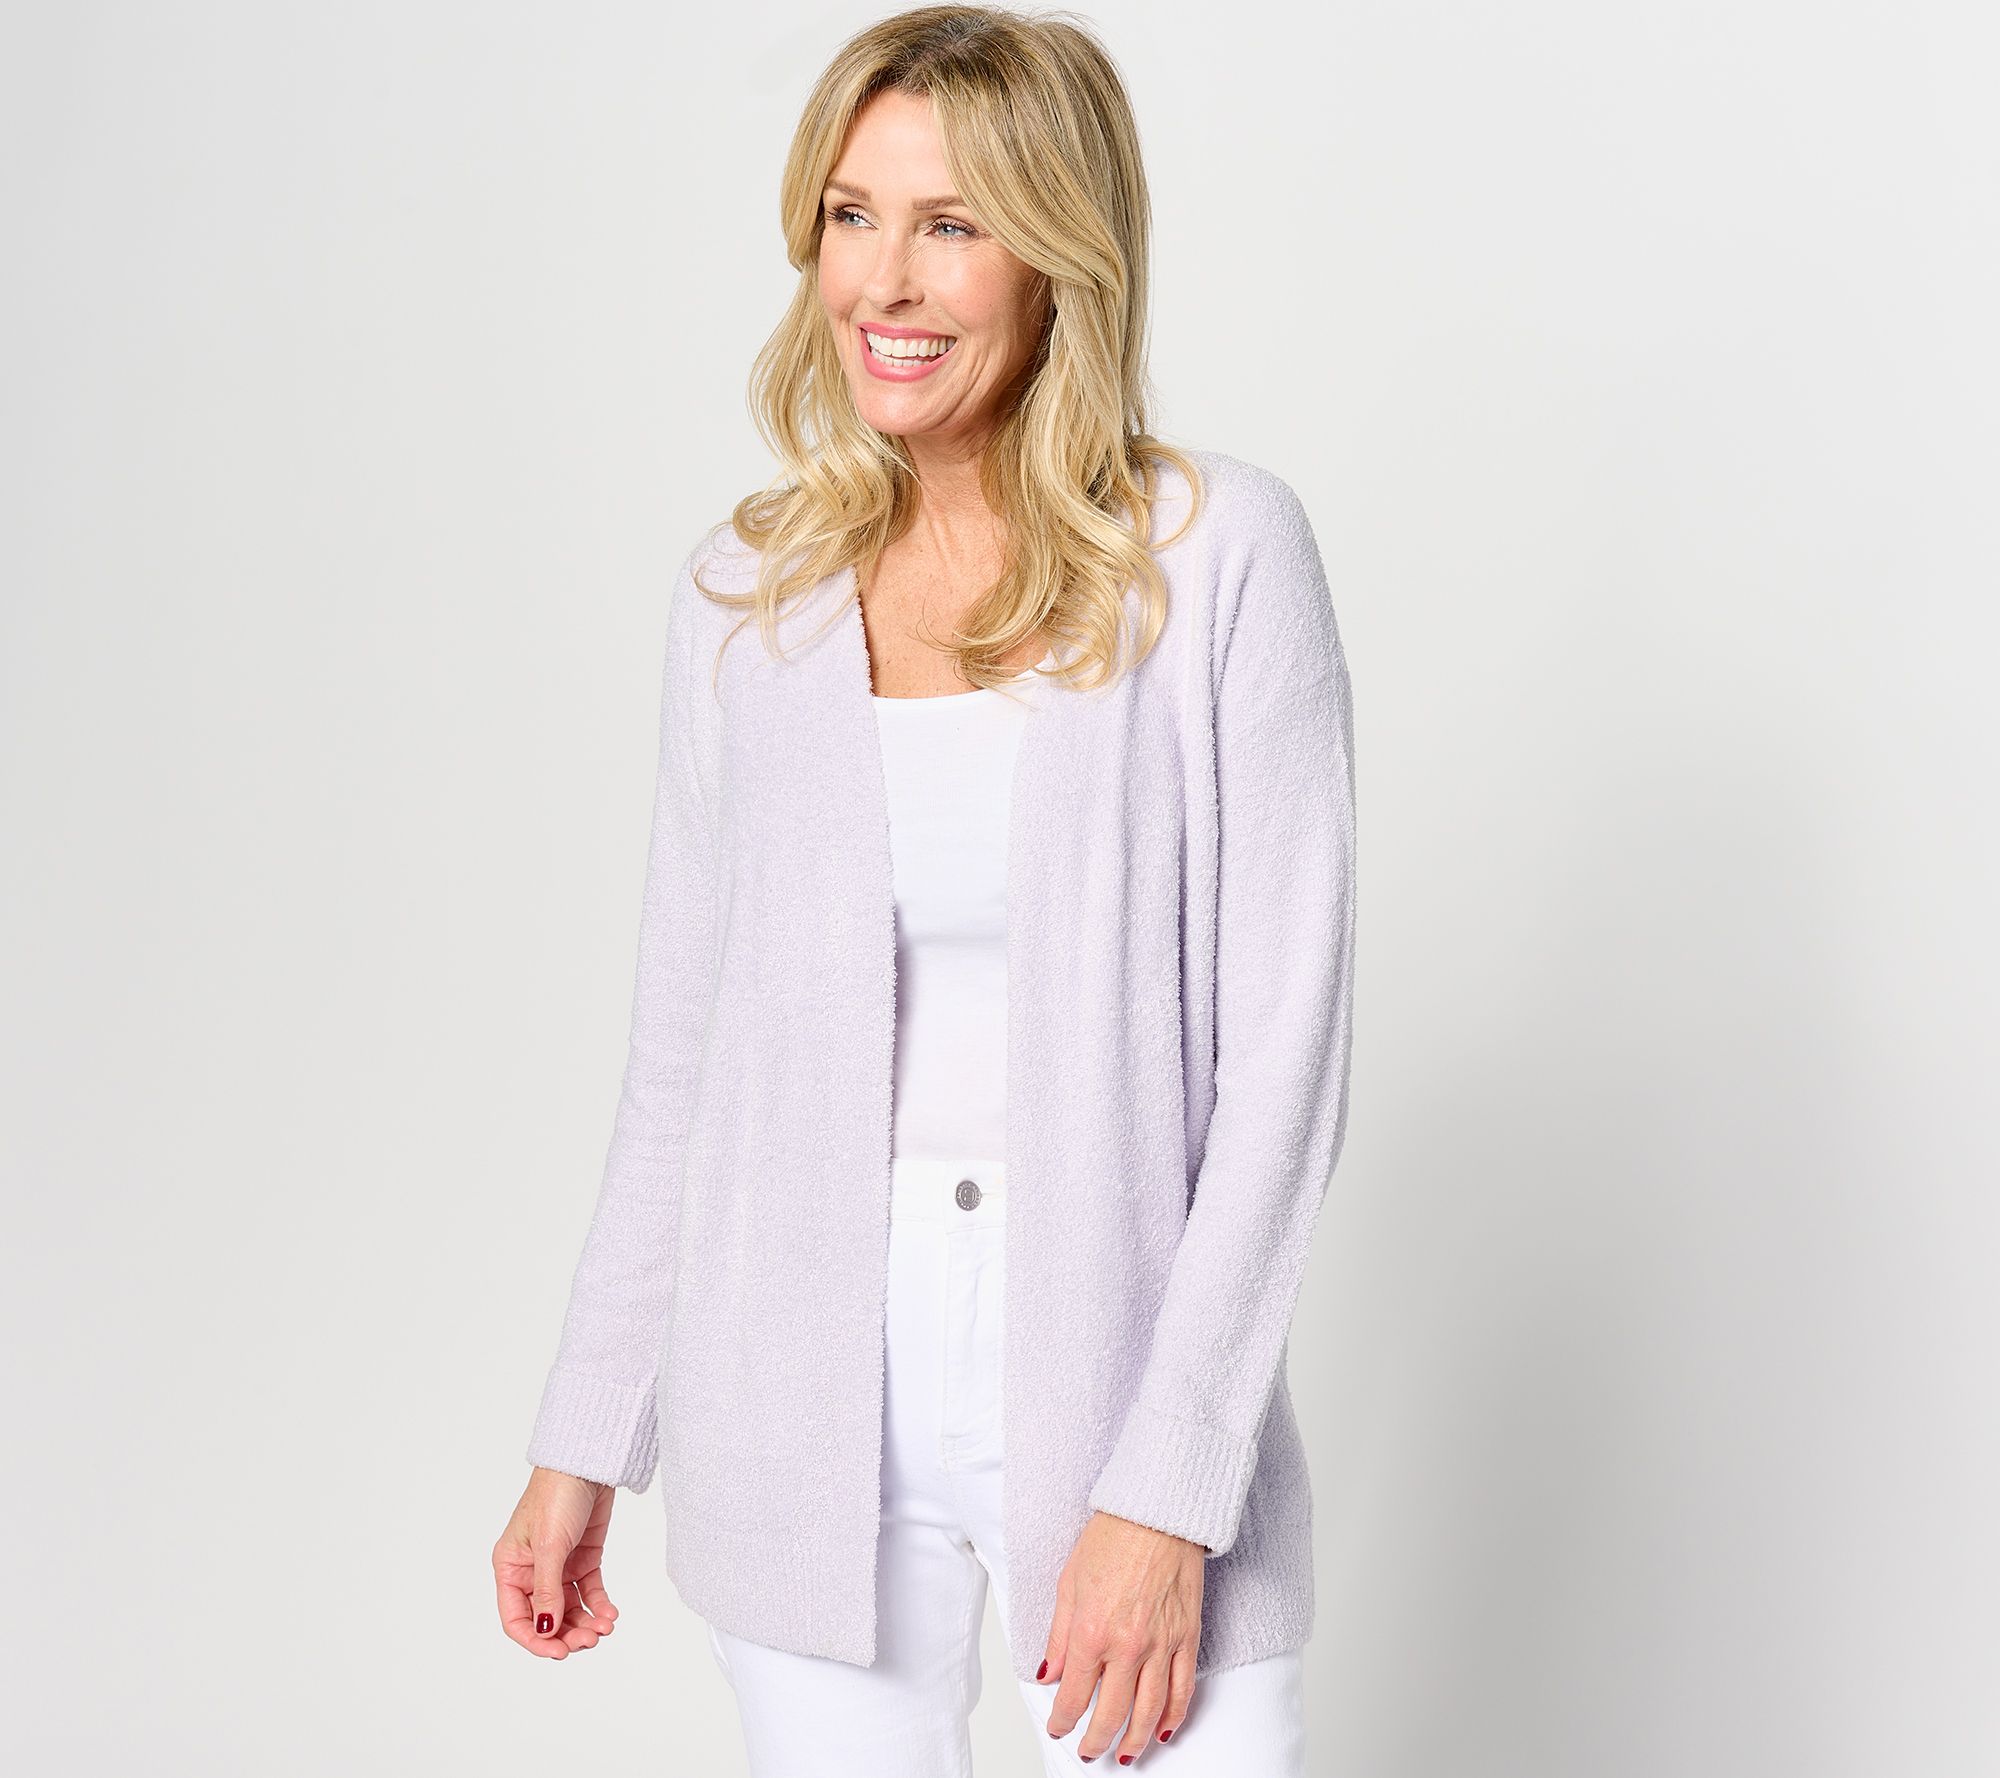 Clothing & Shoes - Tops - Sweaters & Cardigans - Cardigans - Barefoot  Dreams Cozychic Light Ribbed Edge Cardi - Online Shopping for Canadians